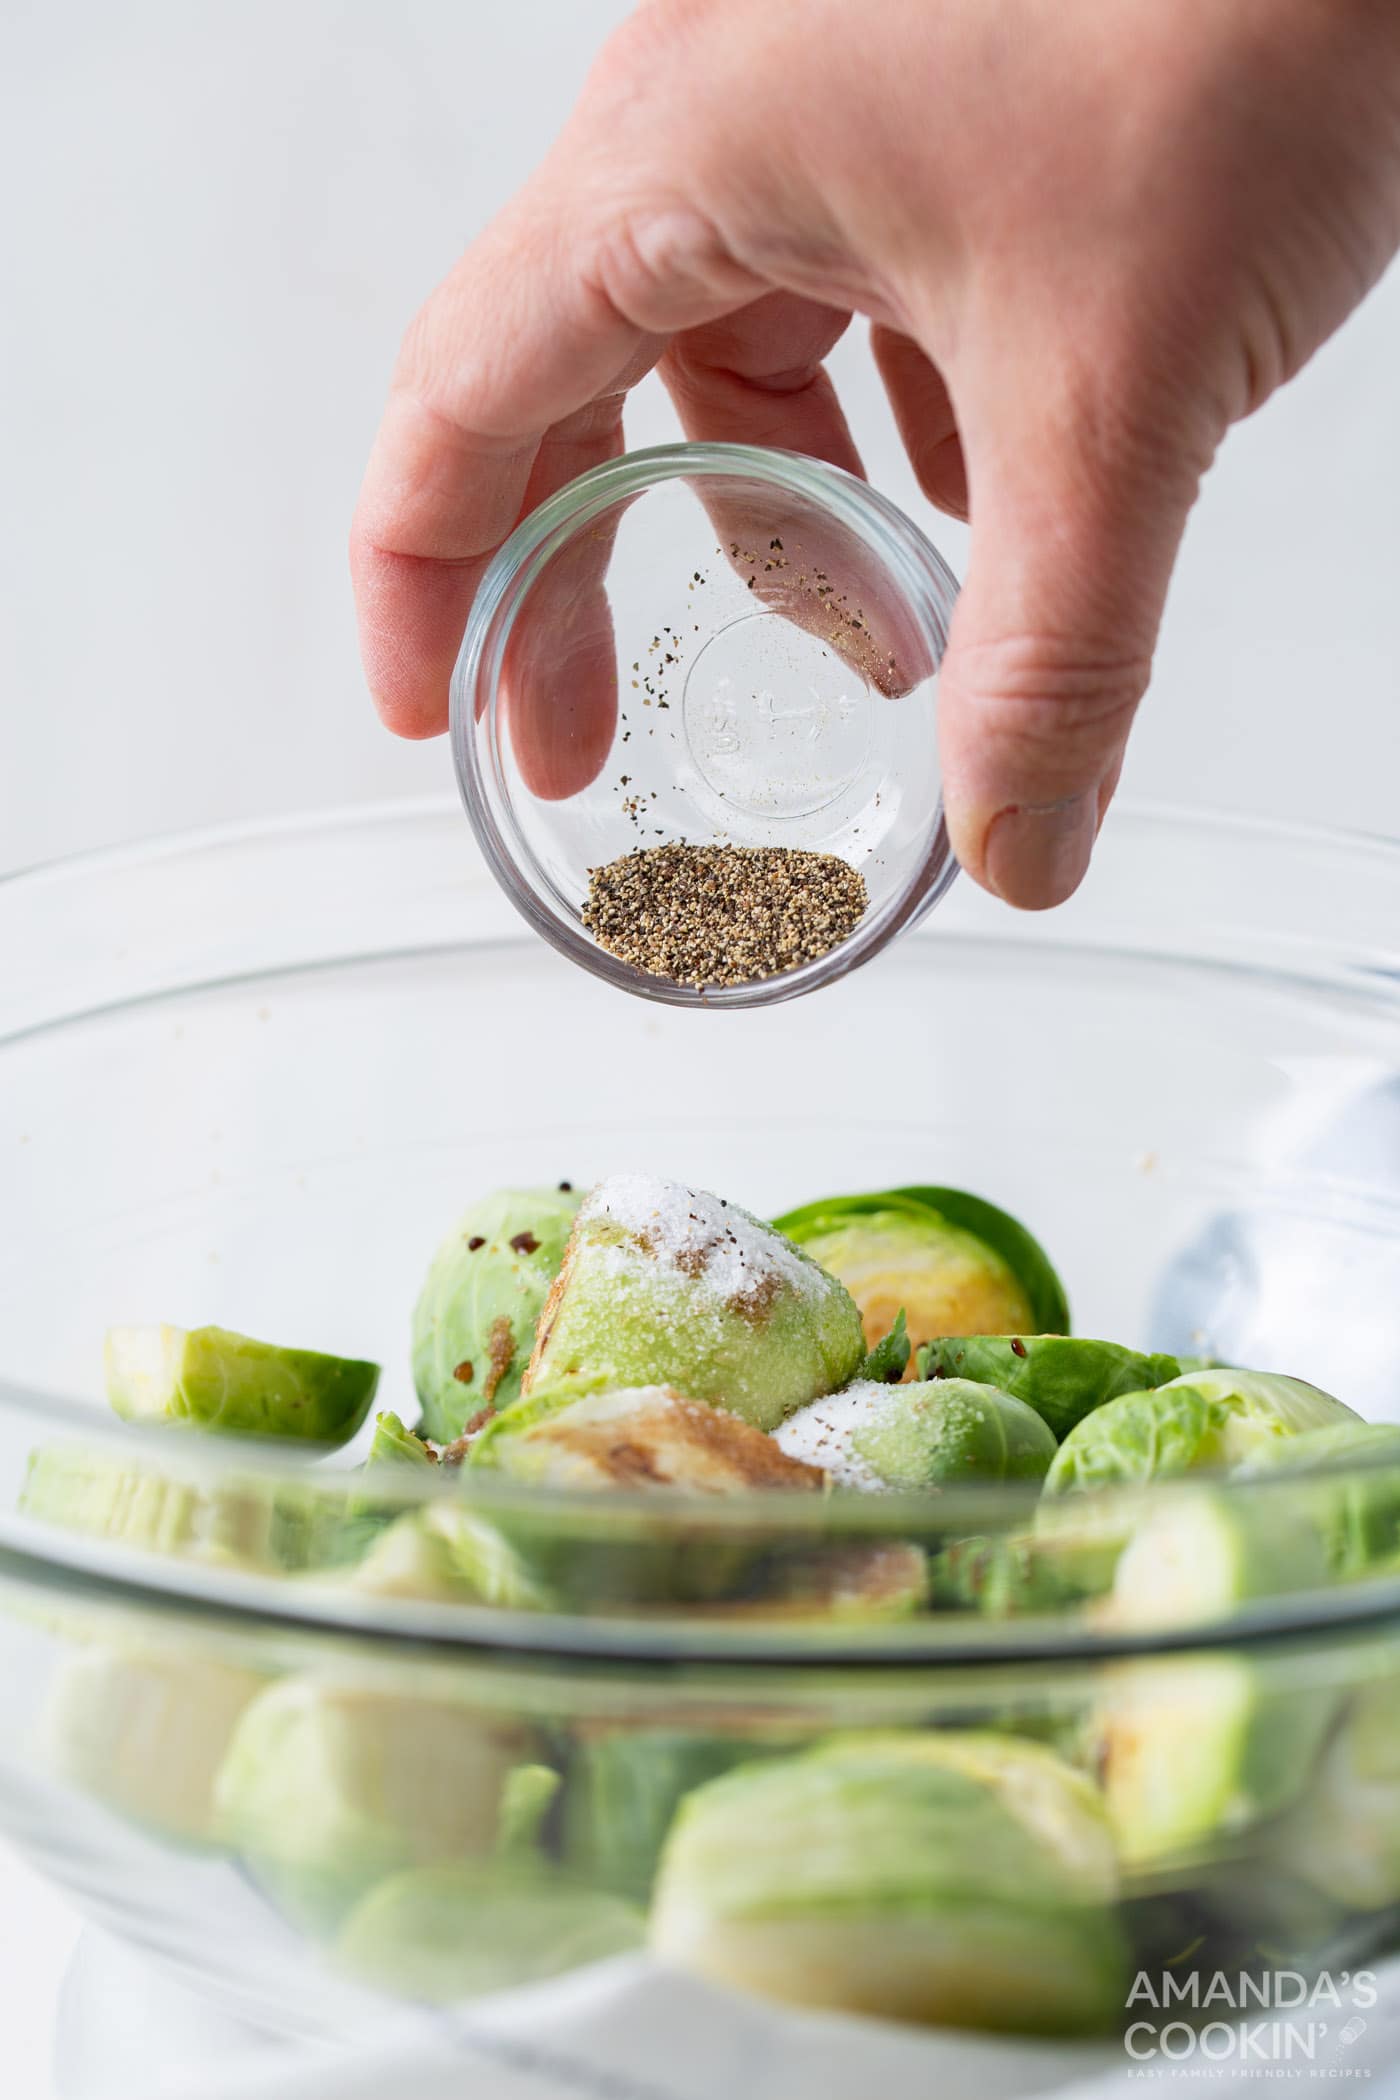 pouring pepper over brussels sprouts